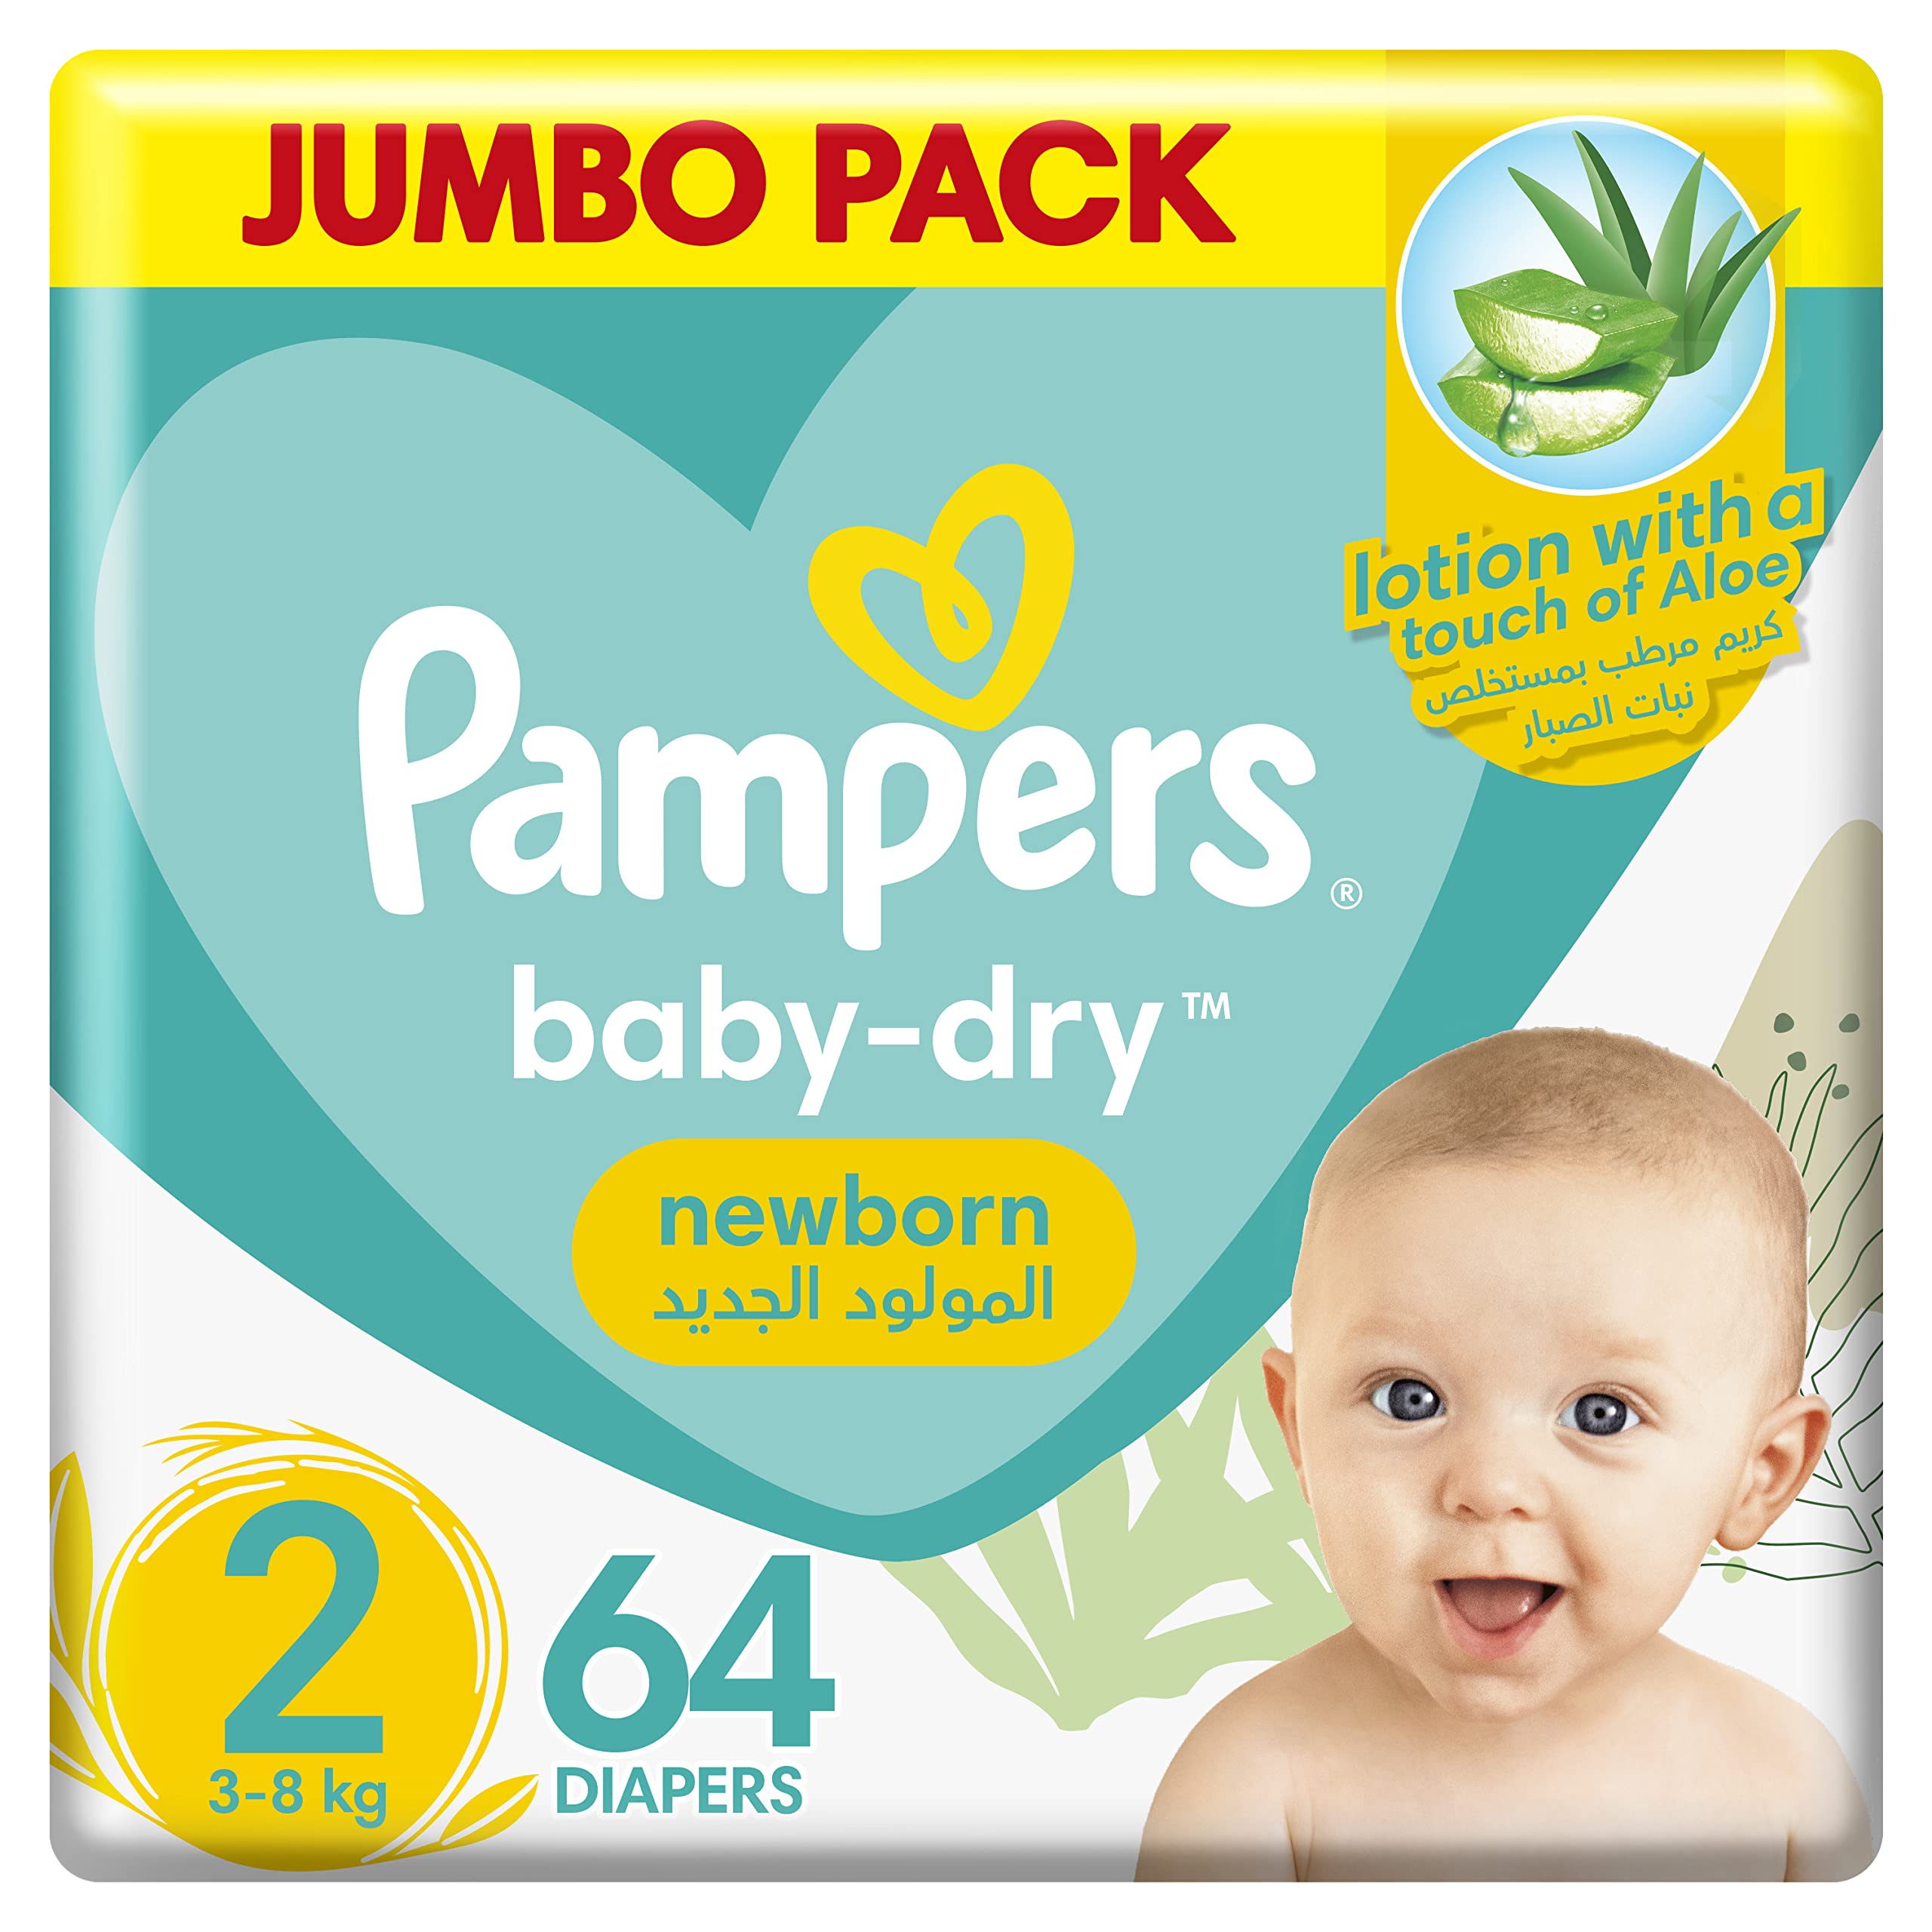 tesco pampers actibe baby 4